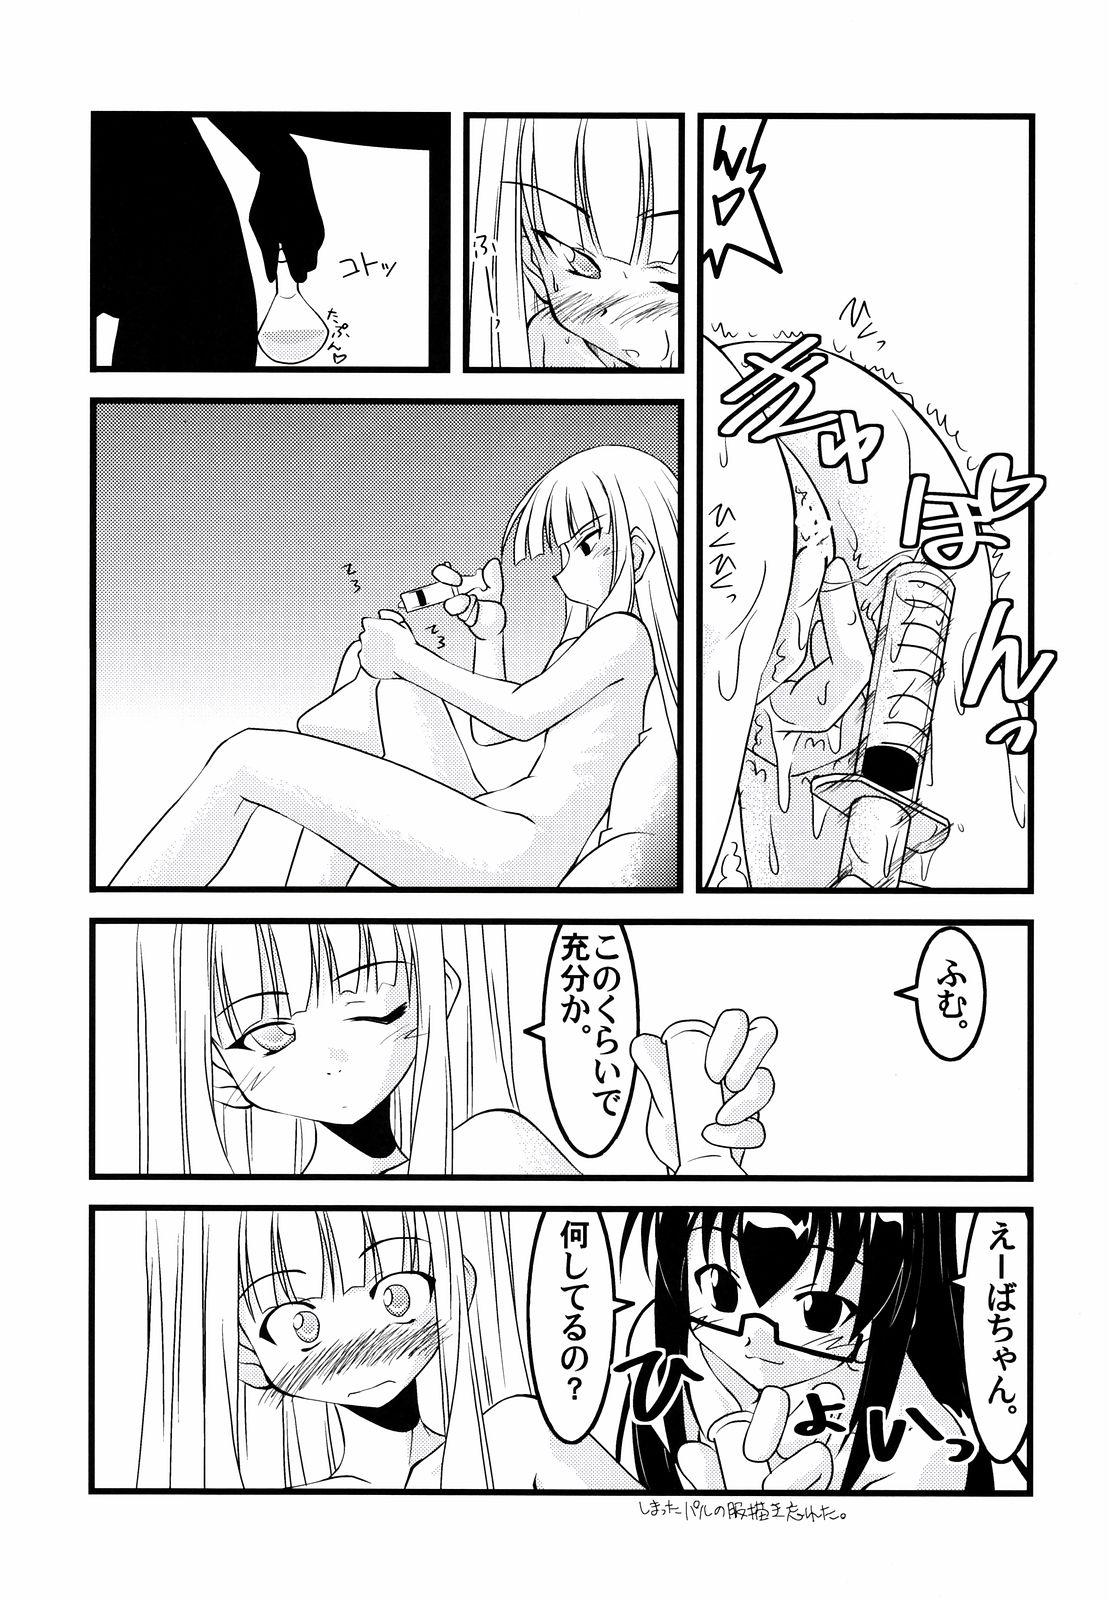 Amature Sex Lovelys in the School with Dream 5 - Mahou sensei negima Chick - Page 4